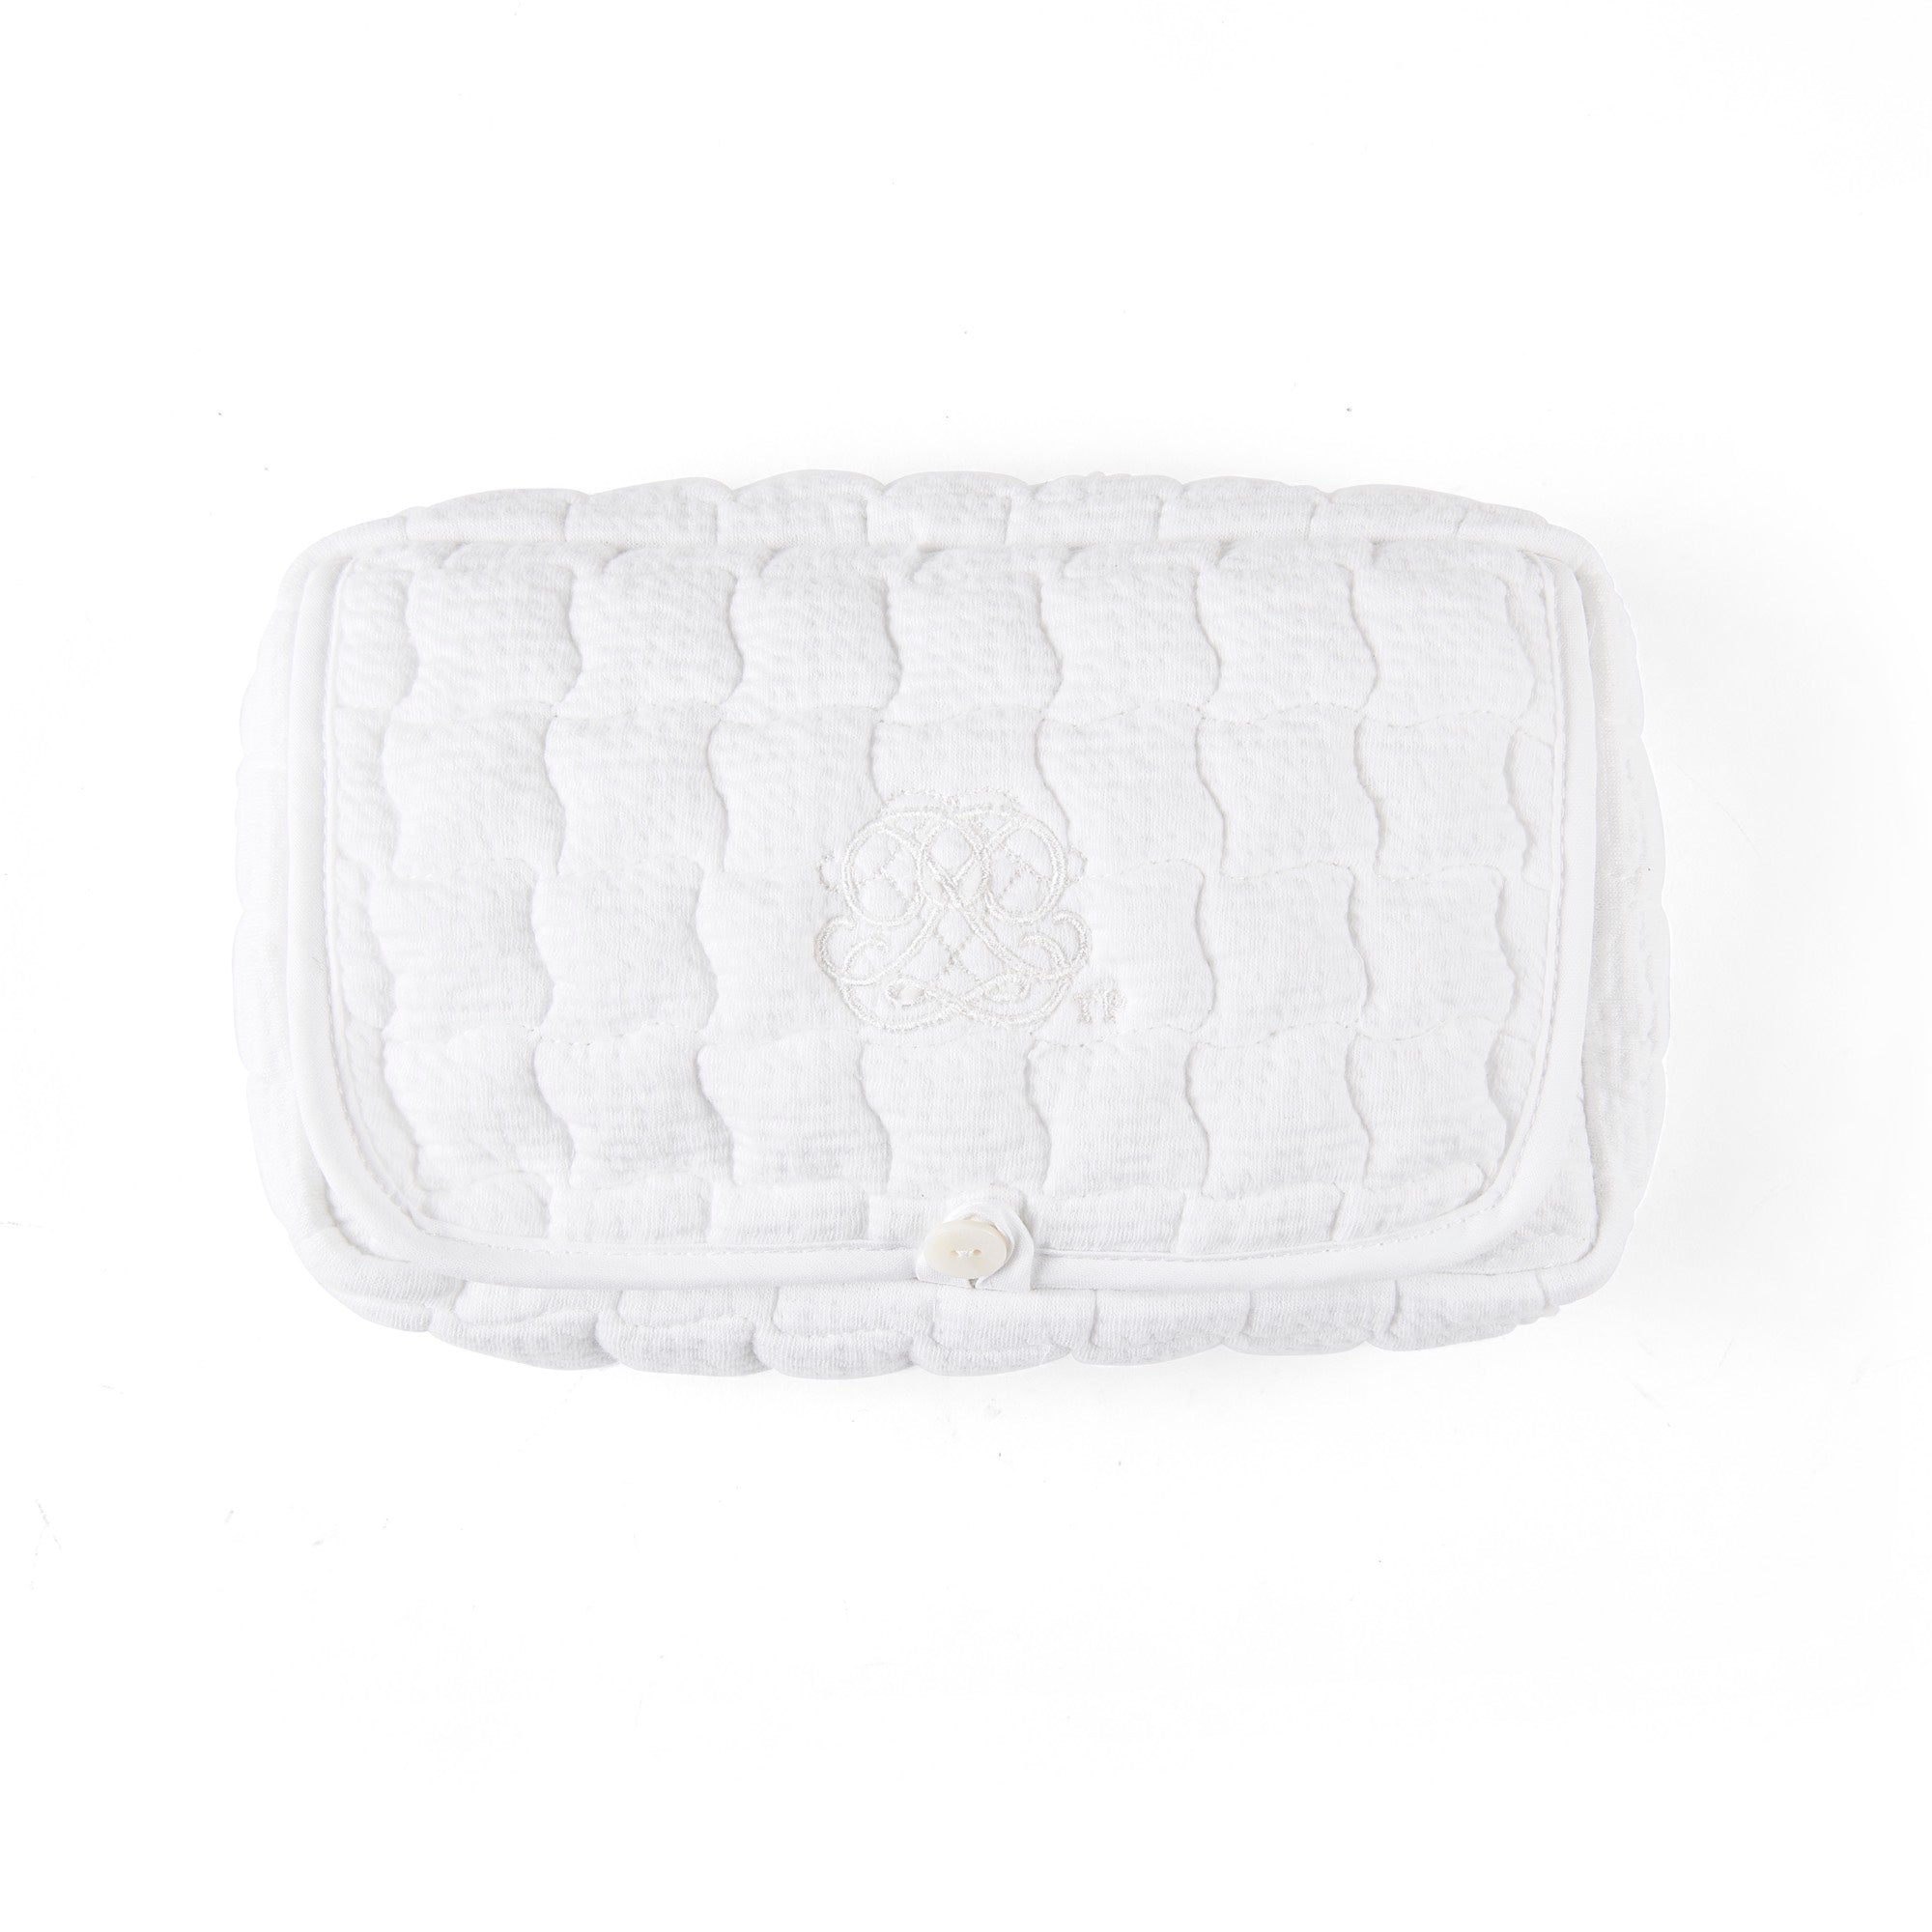 Theophile & Patachou Travel Wipes Cover - Cotton White